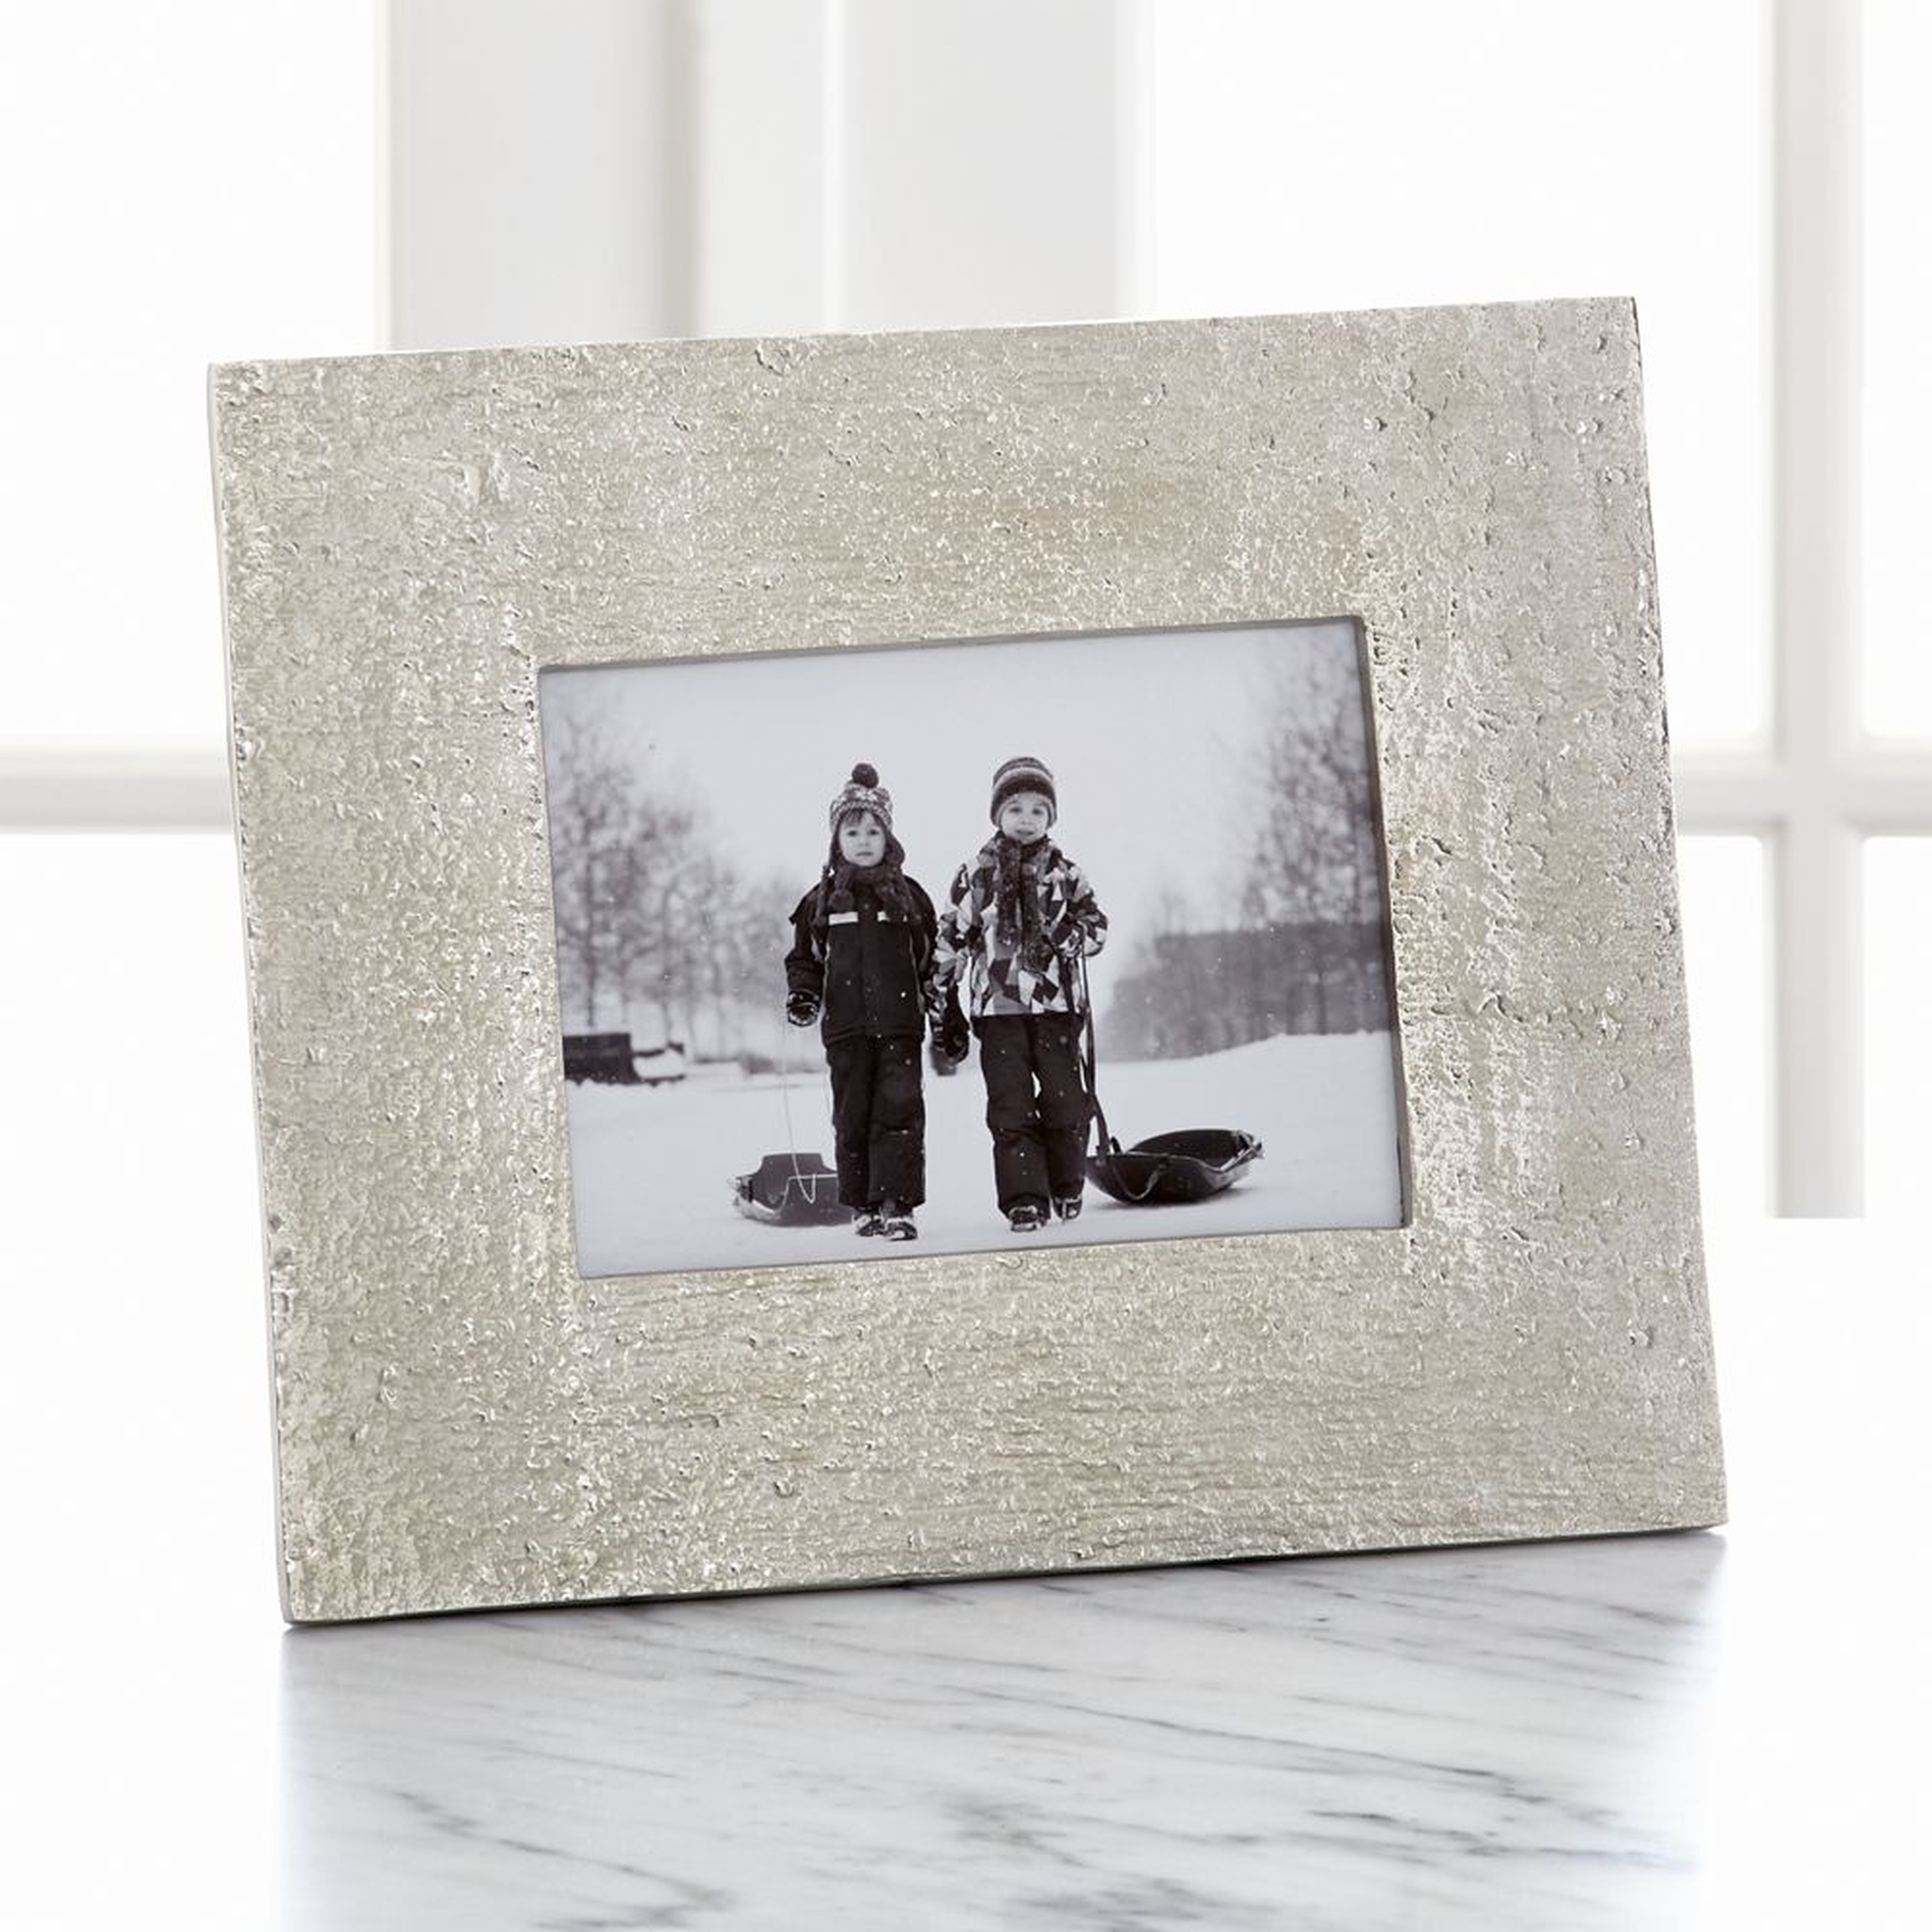 Silver Bark 5"x7" Picture Frame - Crate and Barrel